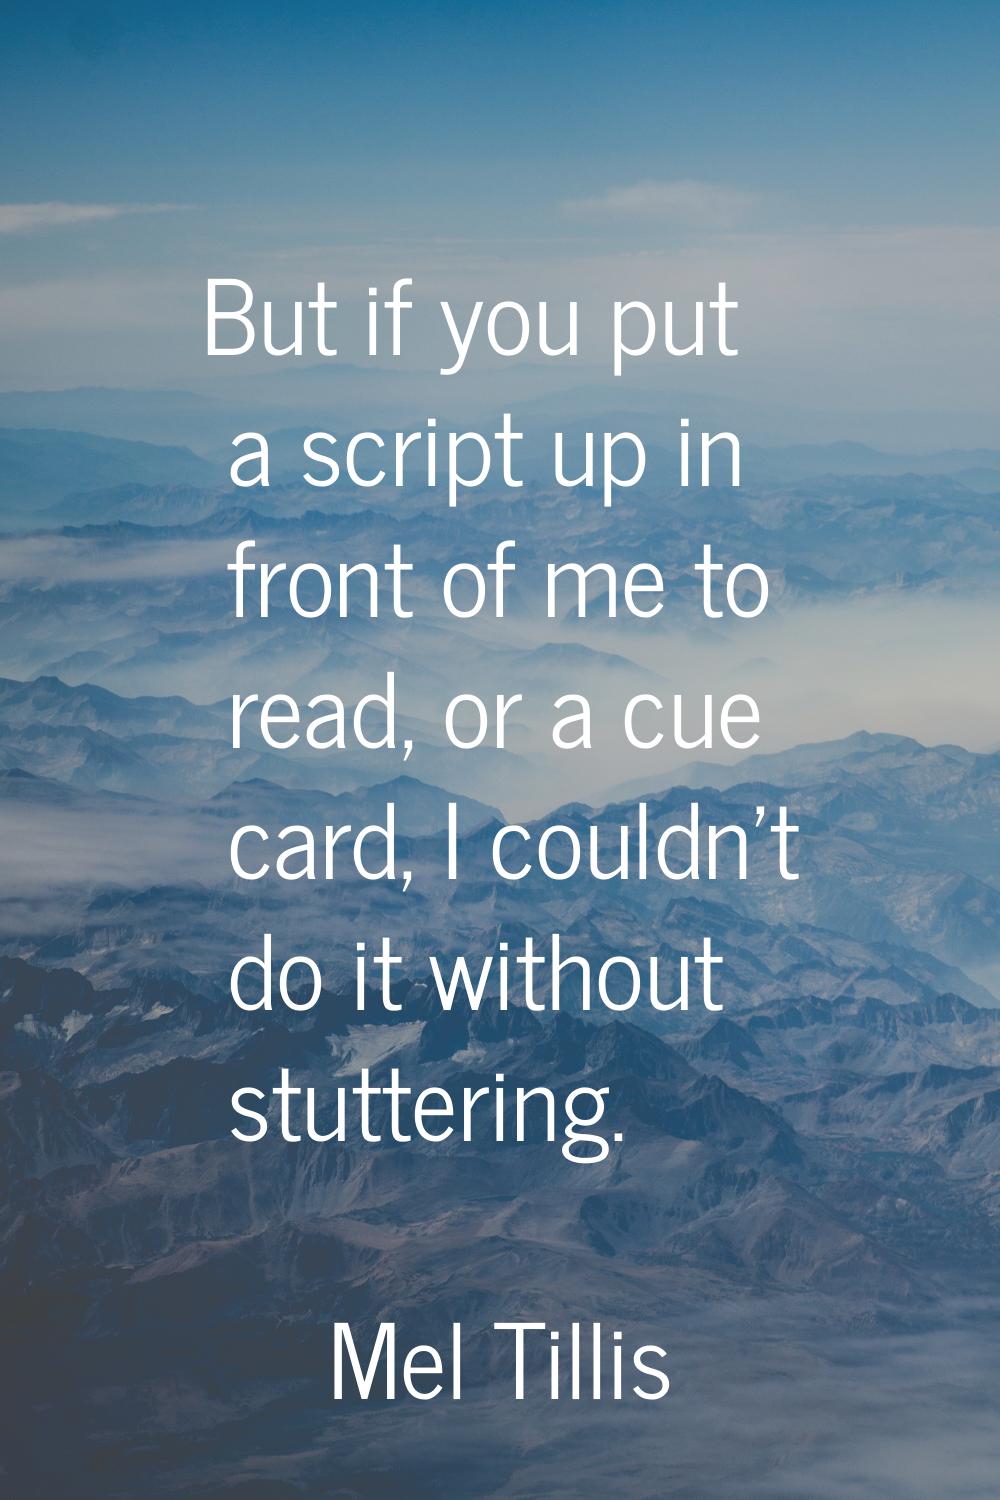 But if you put a script up in front of me to read, or a cue card, I couldn't do it without stutteri